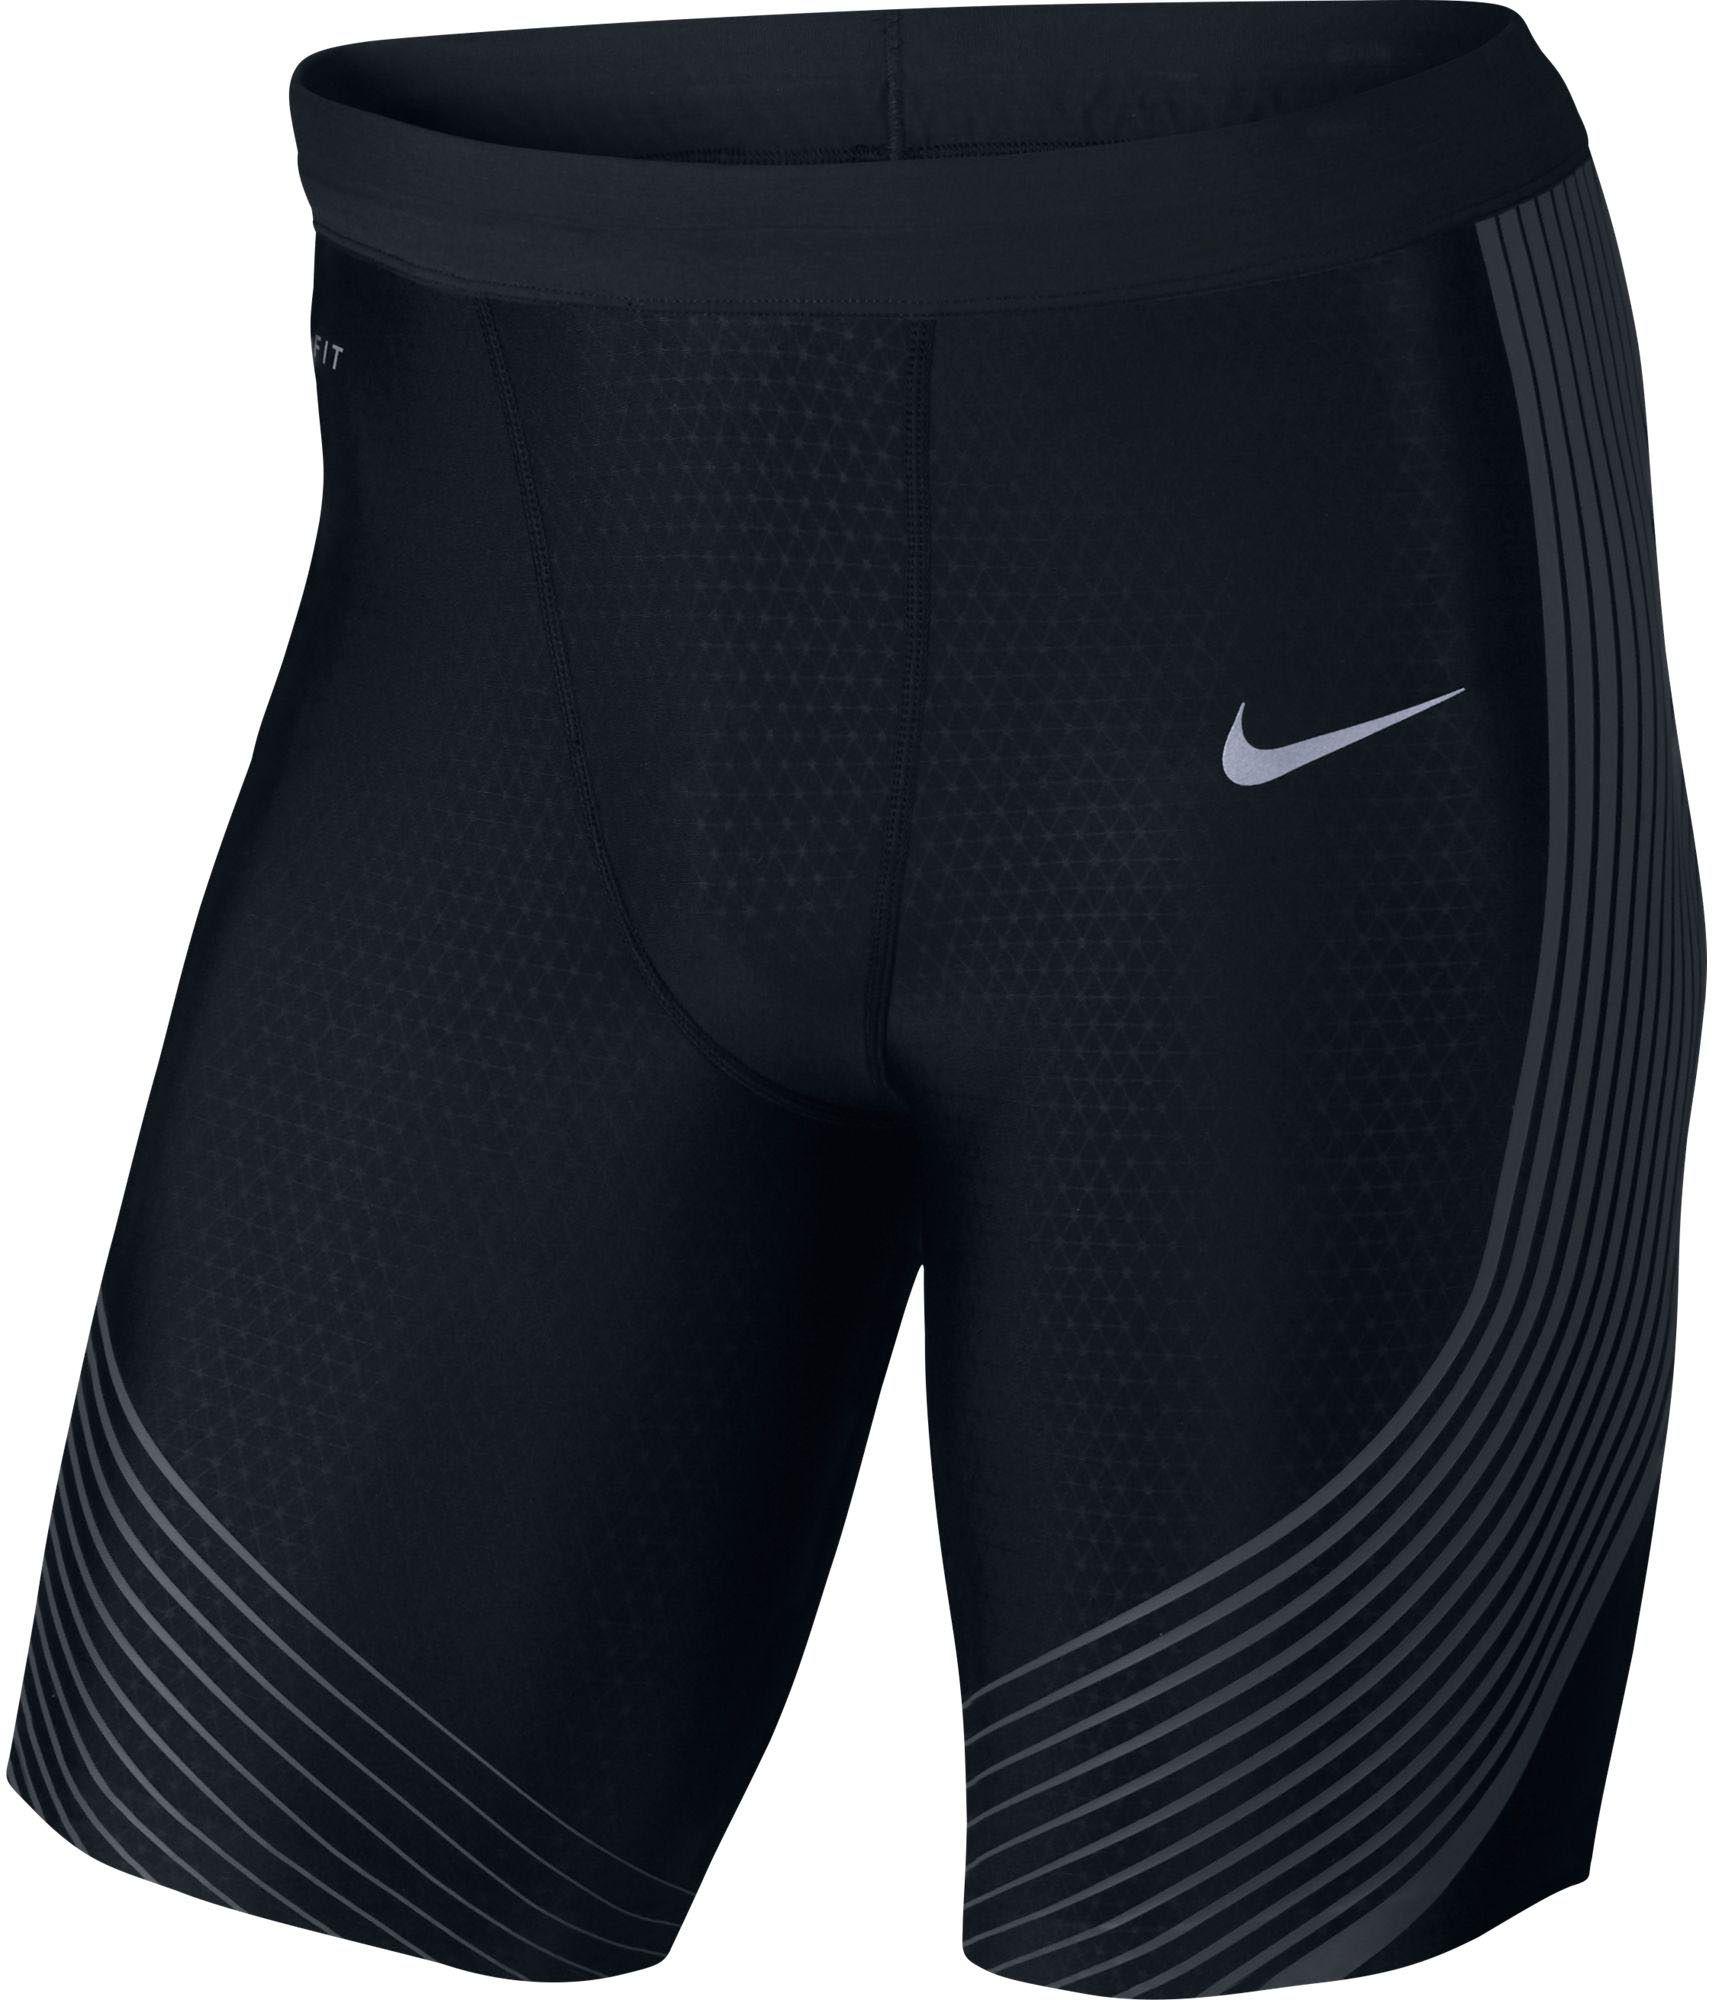 nike power speed tights men,Cheap,Sell,OFF 73%,wellcomwin.it